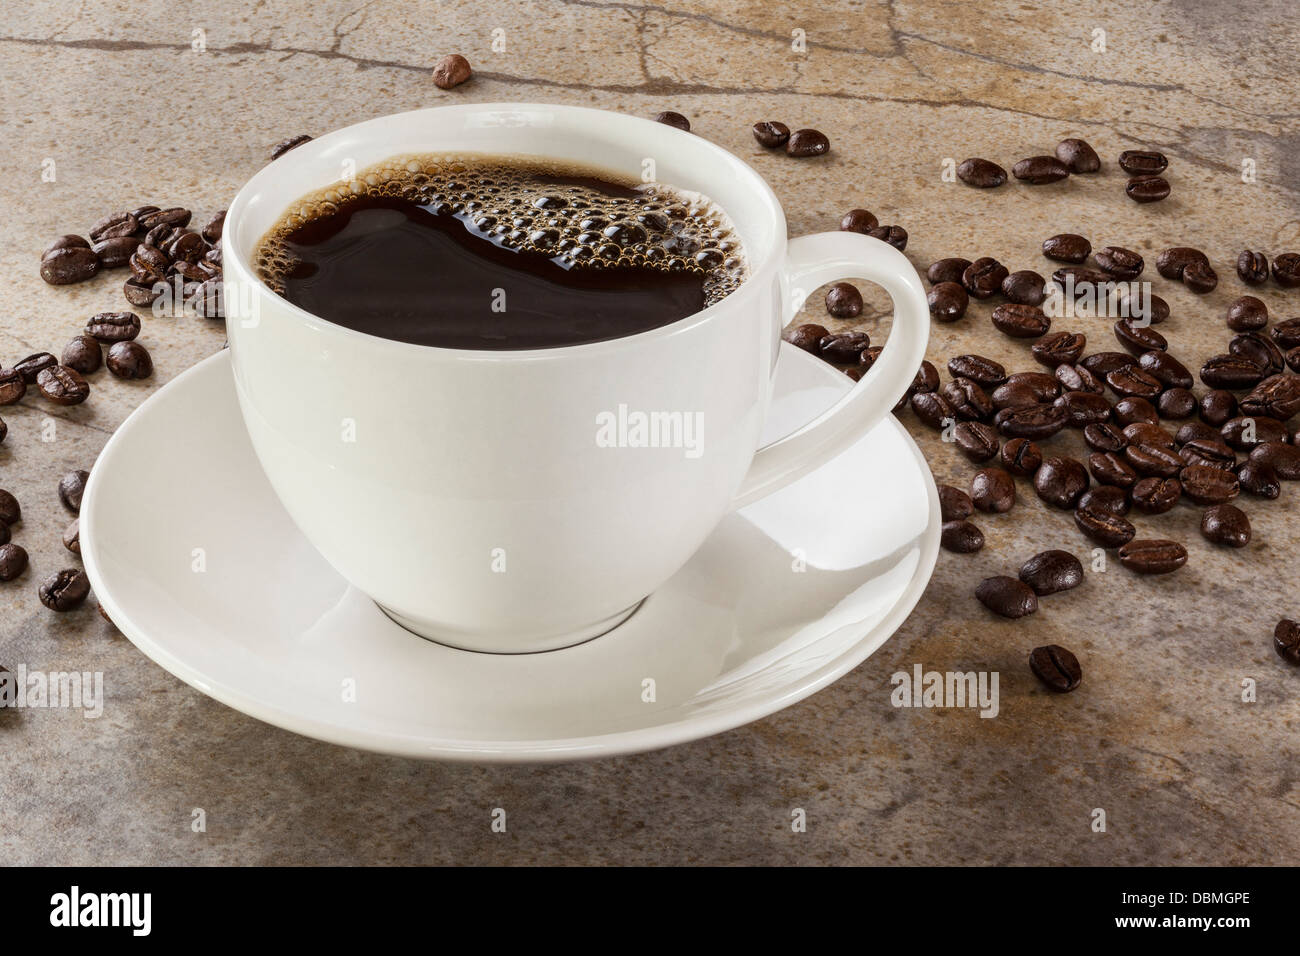 Cup of coffee on a marble top table, with coffee beans scattered around. Front to back focus. Stock Photo